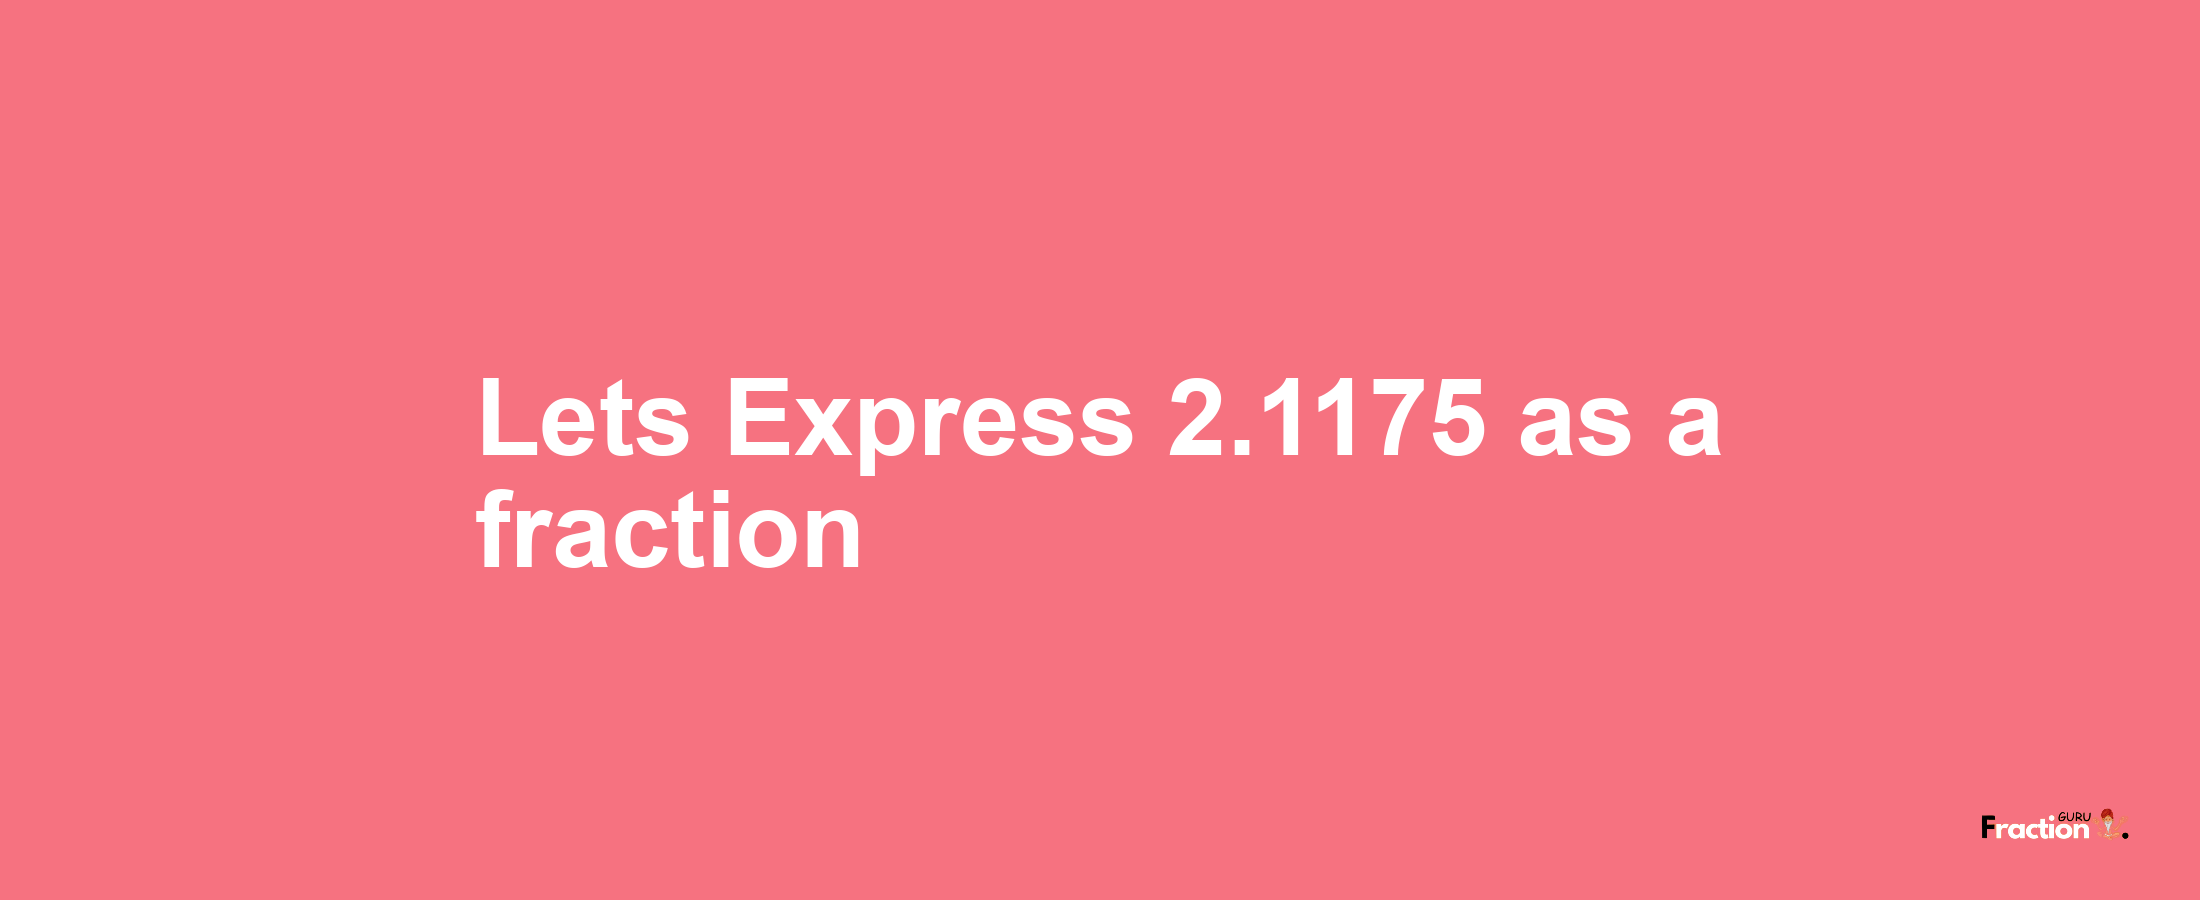 Lets Express 2.1175 as afraction